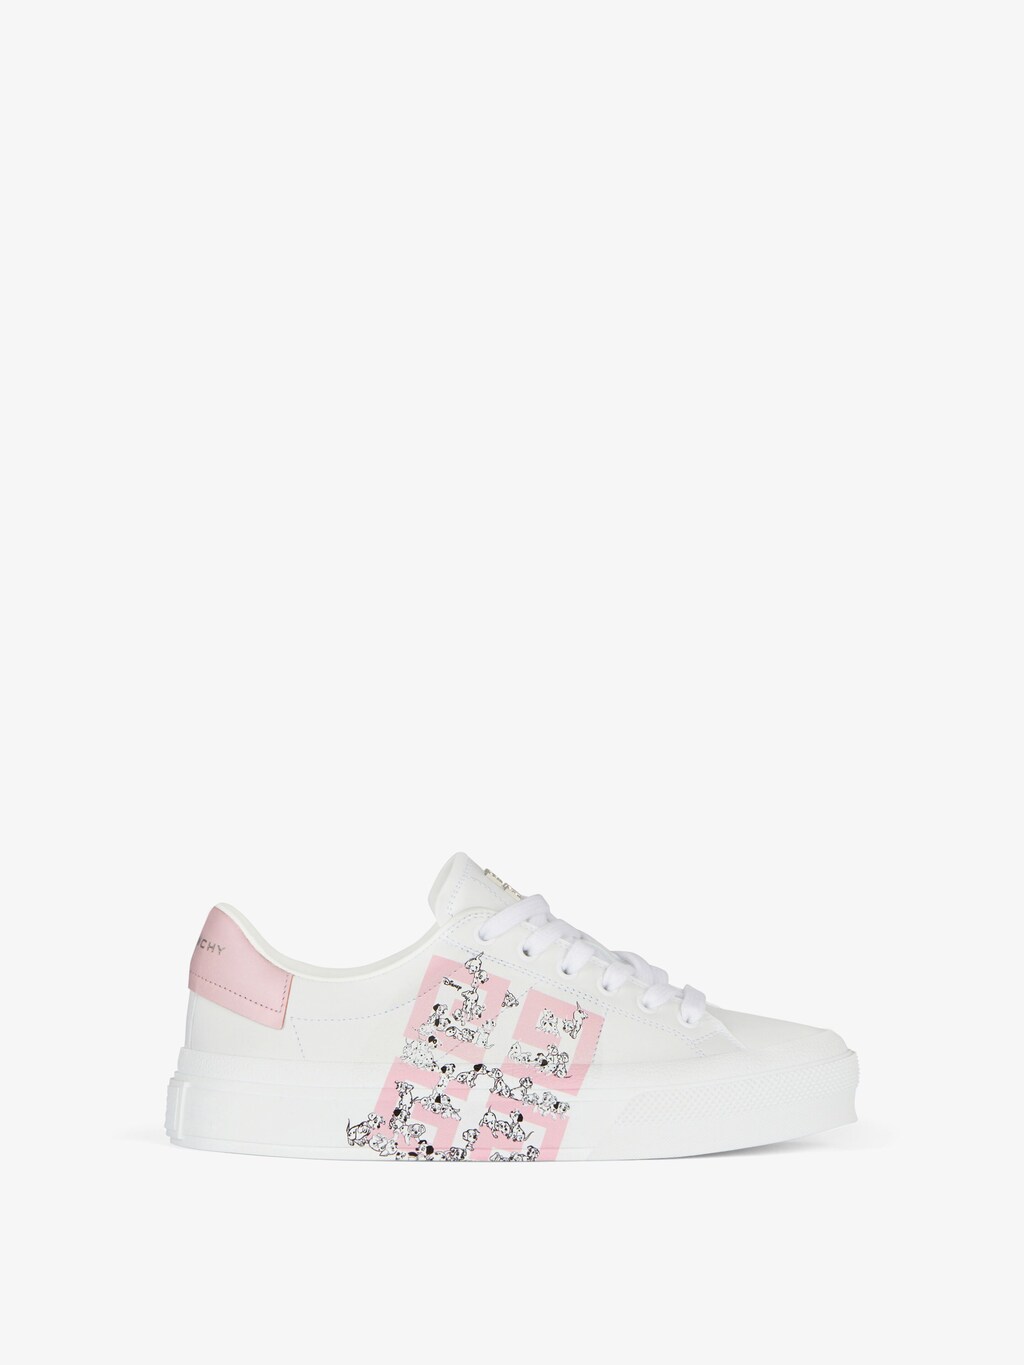 givenchy.com | 101 Dalmatians City Sport sneakers in leather